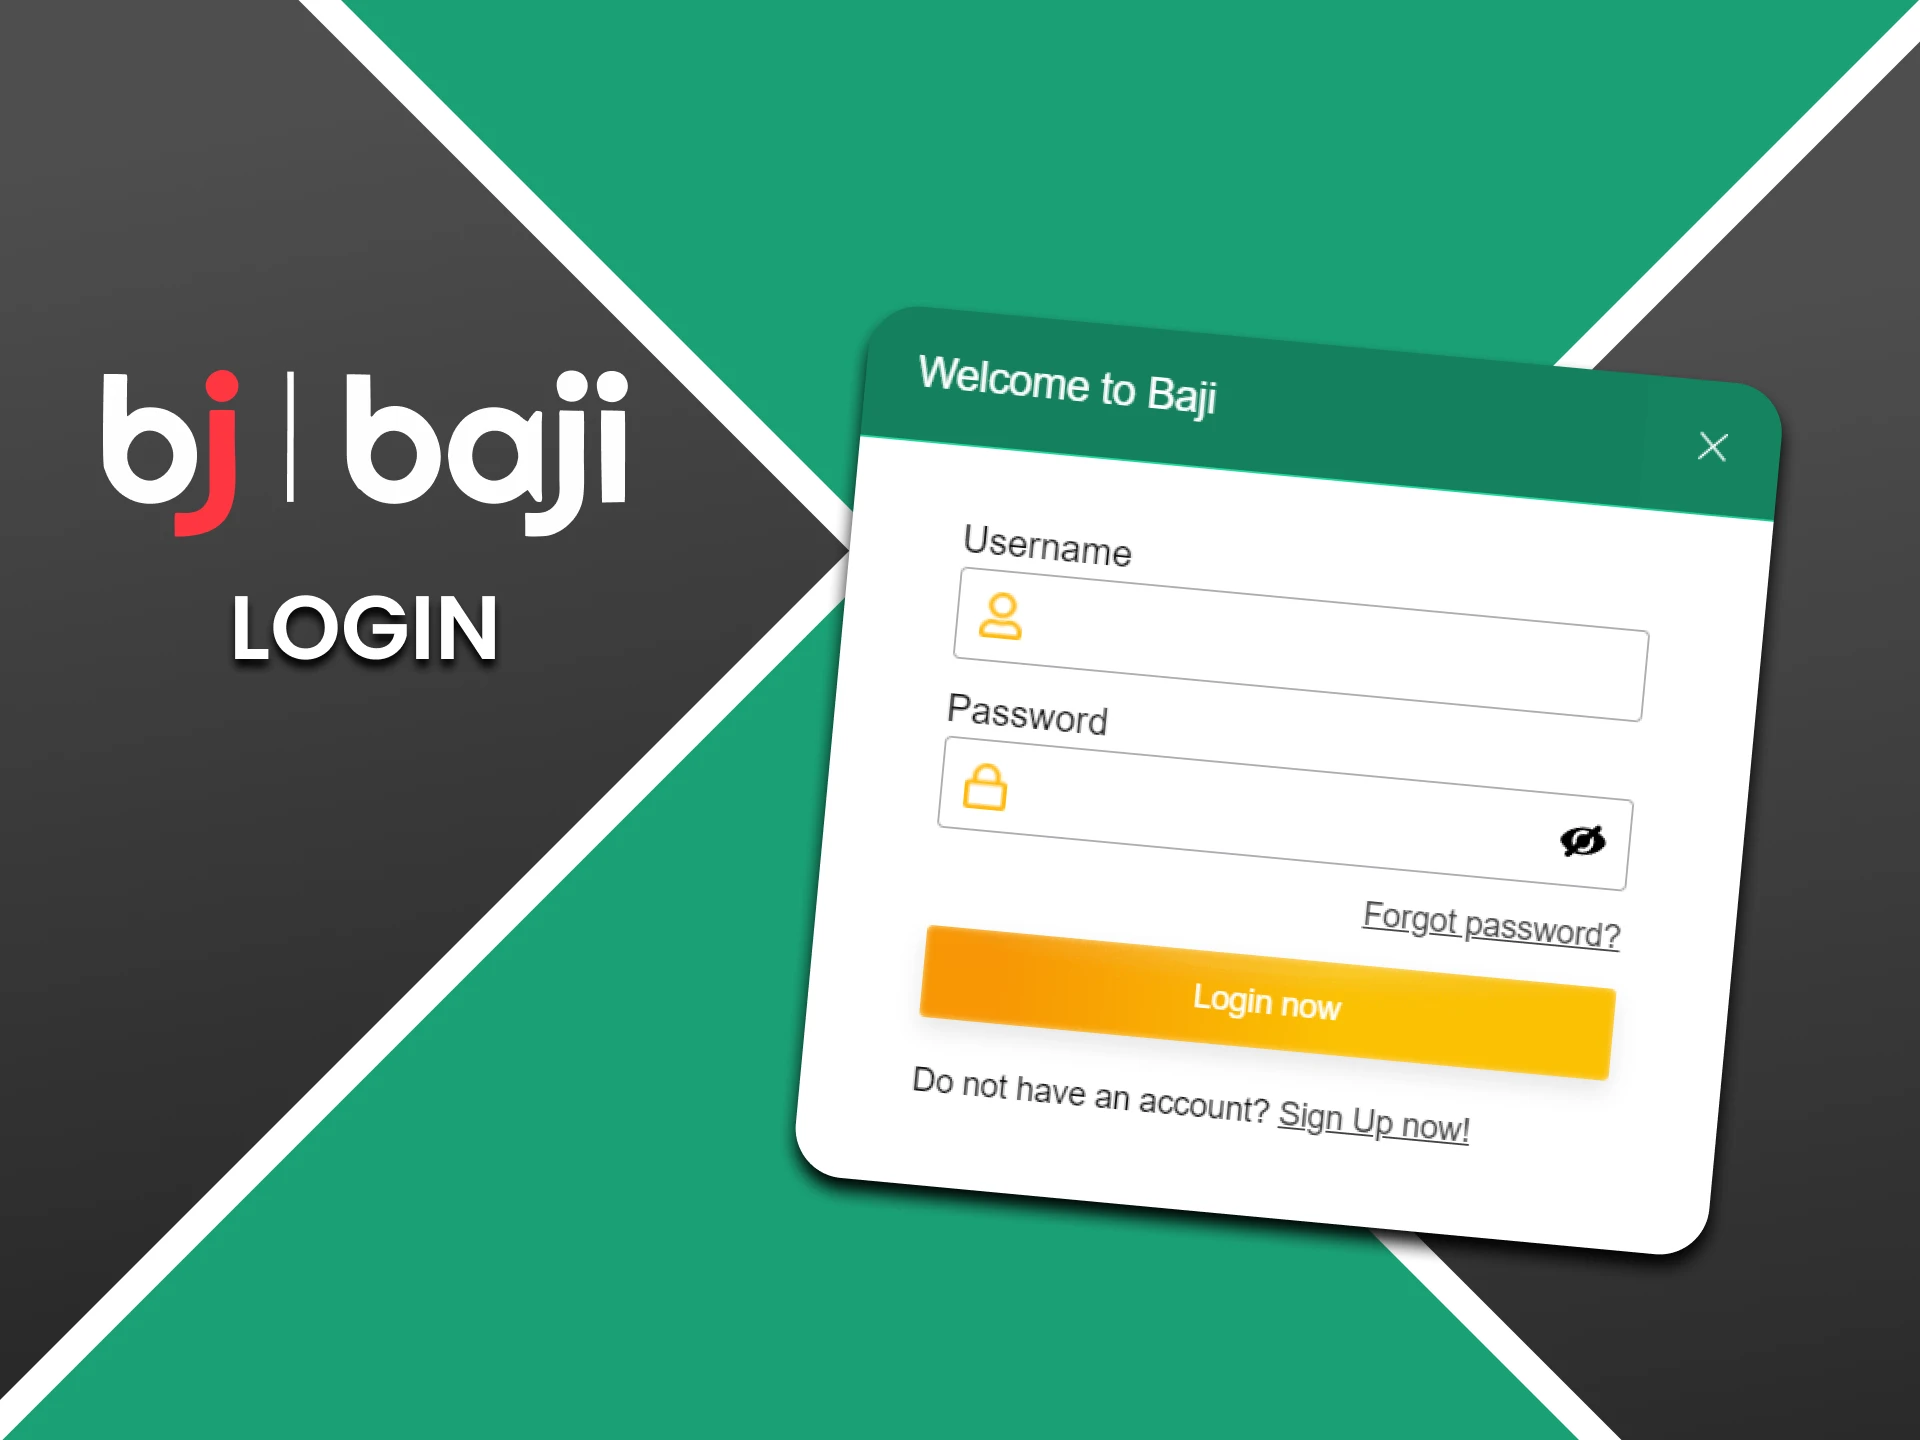 Log in to your personal account on the Baji website.